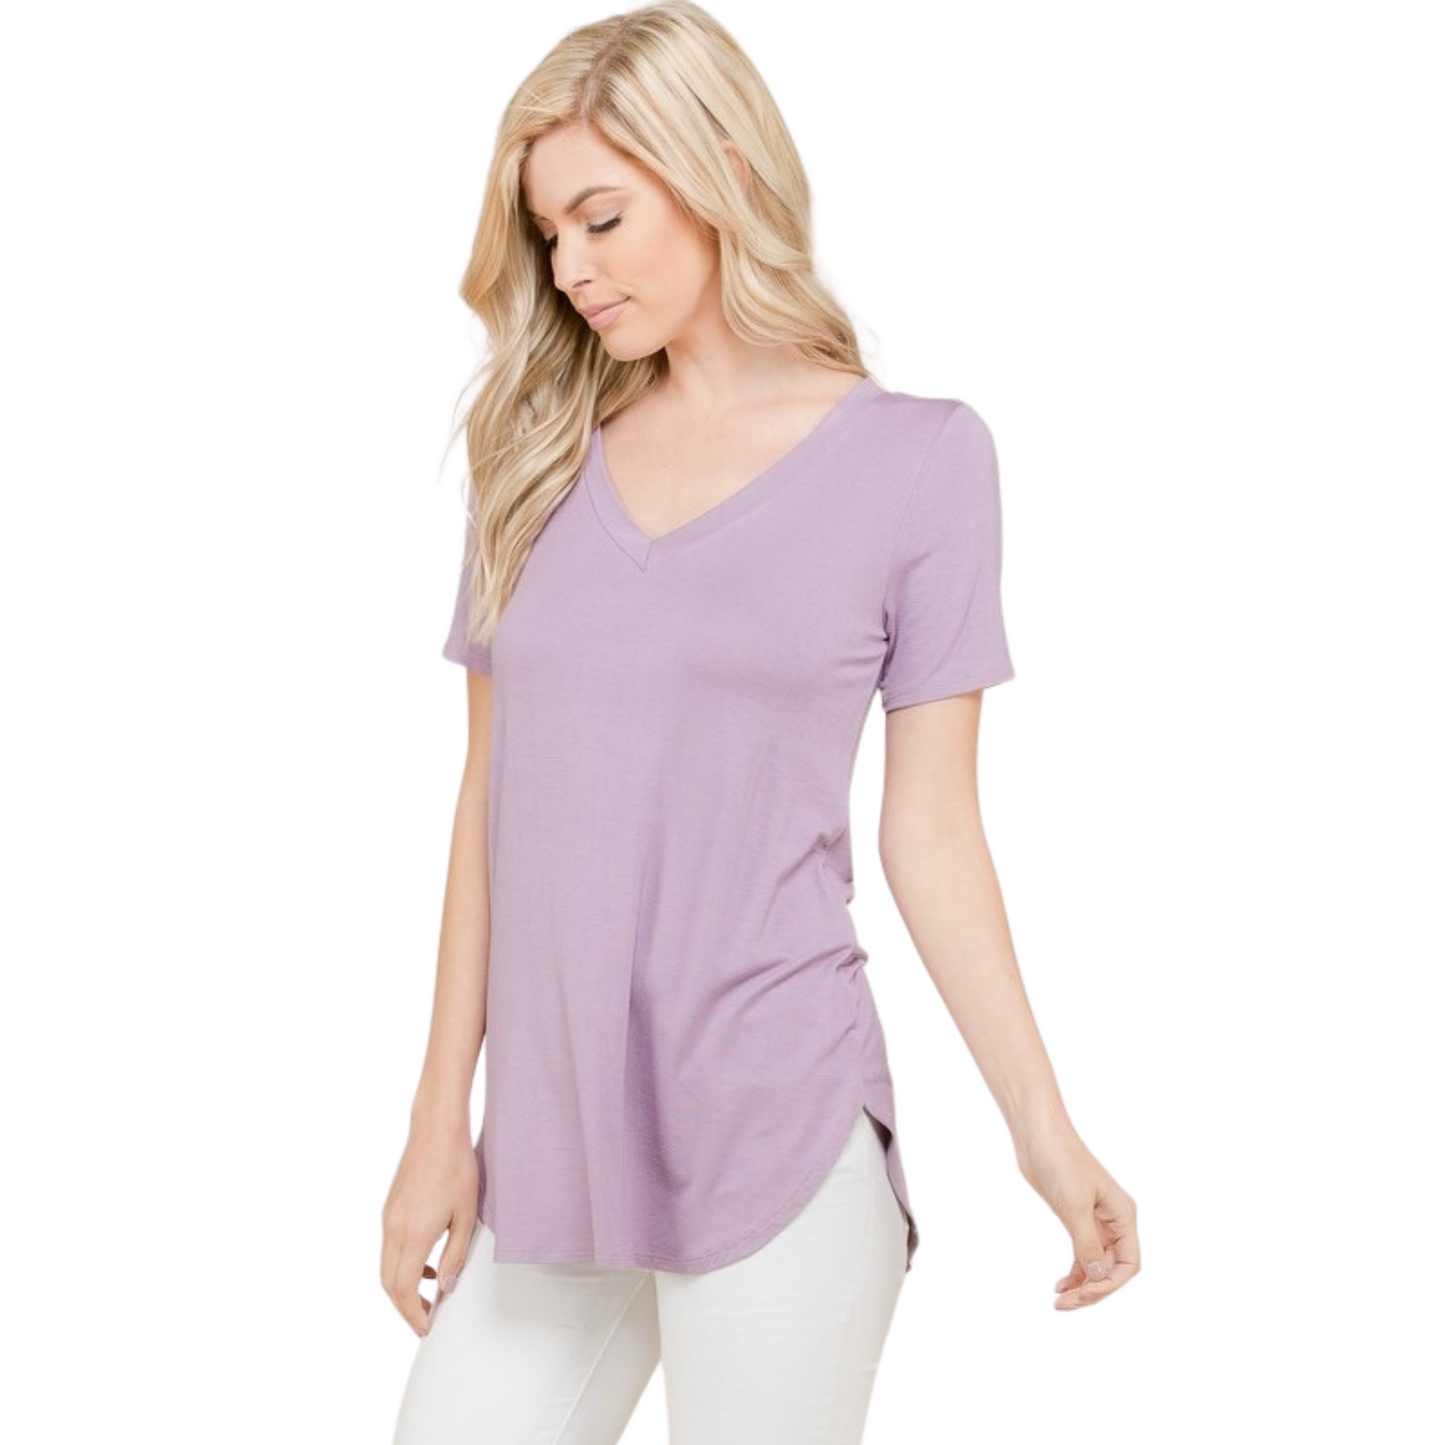 This Fitted V-Neck Tee is designed with plus size women in mind. With a variety of colors available, there is something for everyone. The flattering cut ensures a smooth silhouette for a flattering look.